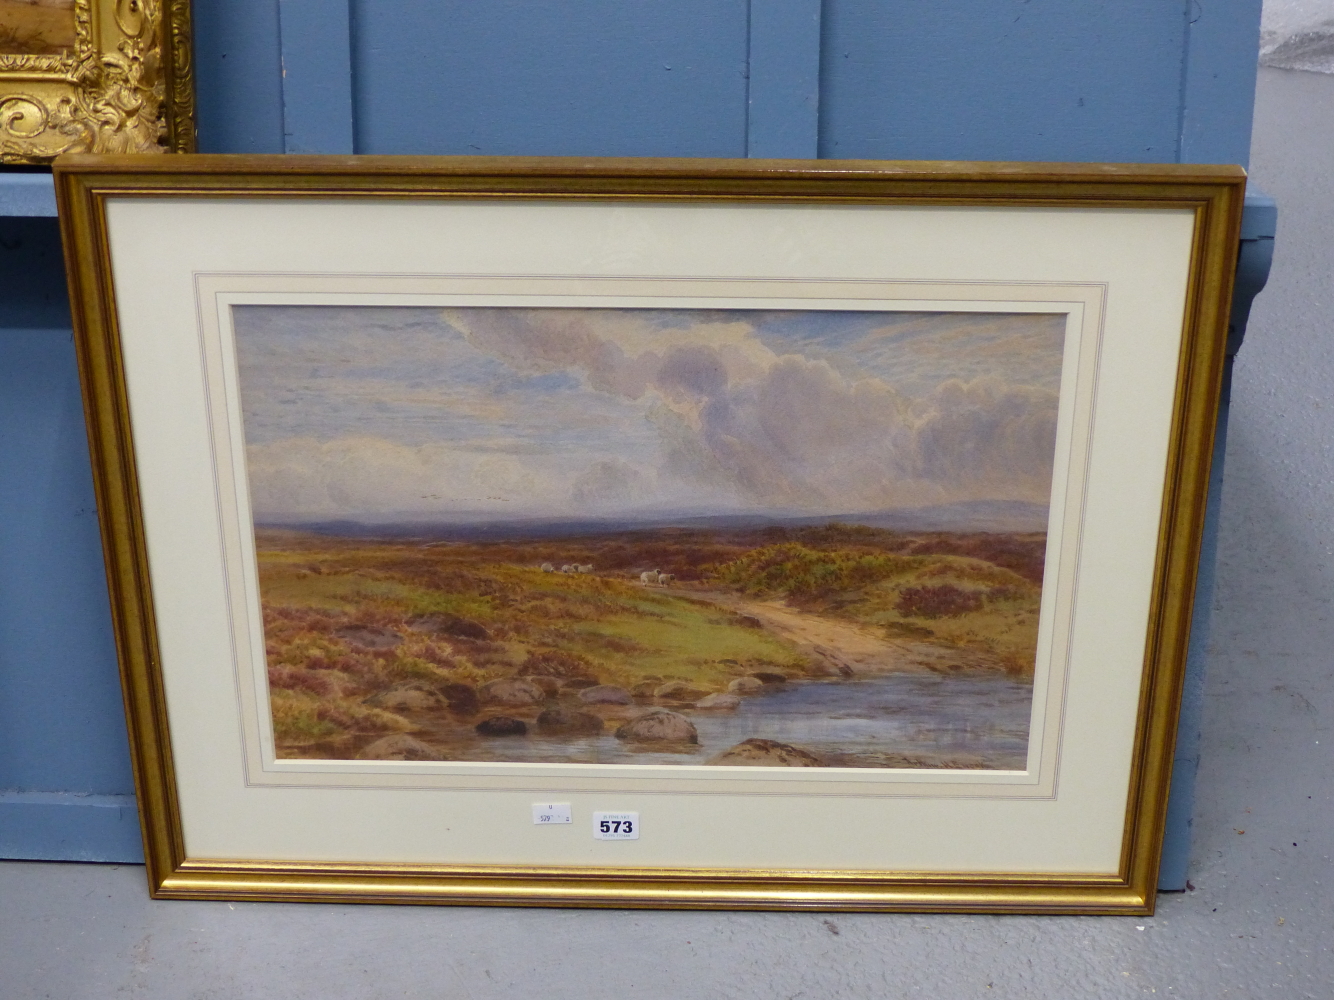 ARTHUR HENRY ENOCK (1828-1917), EXTENSIVE MOORLAND LANDSCAPE WITH SHEEP, SIGNED, WATERCOLOUR, 51 x - Image 3 of 5